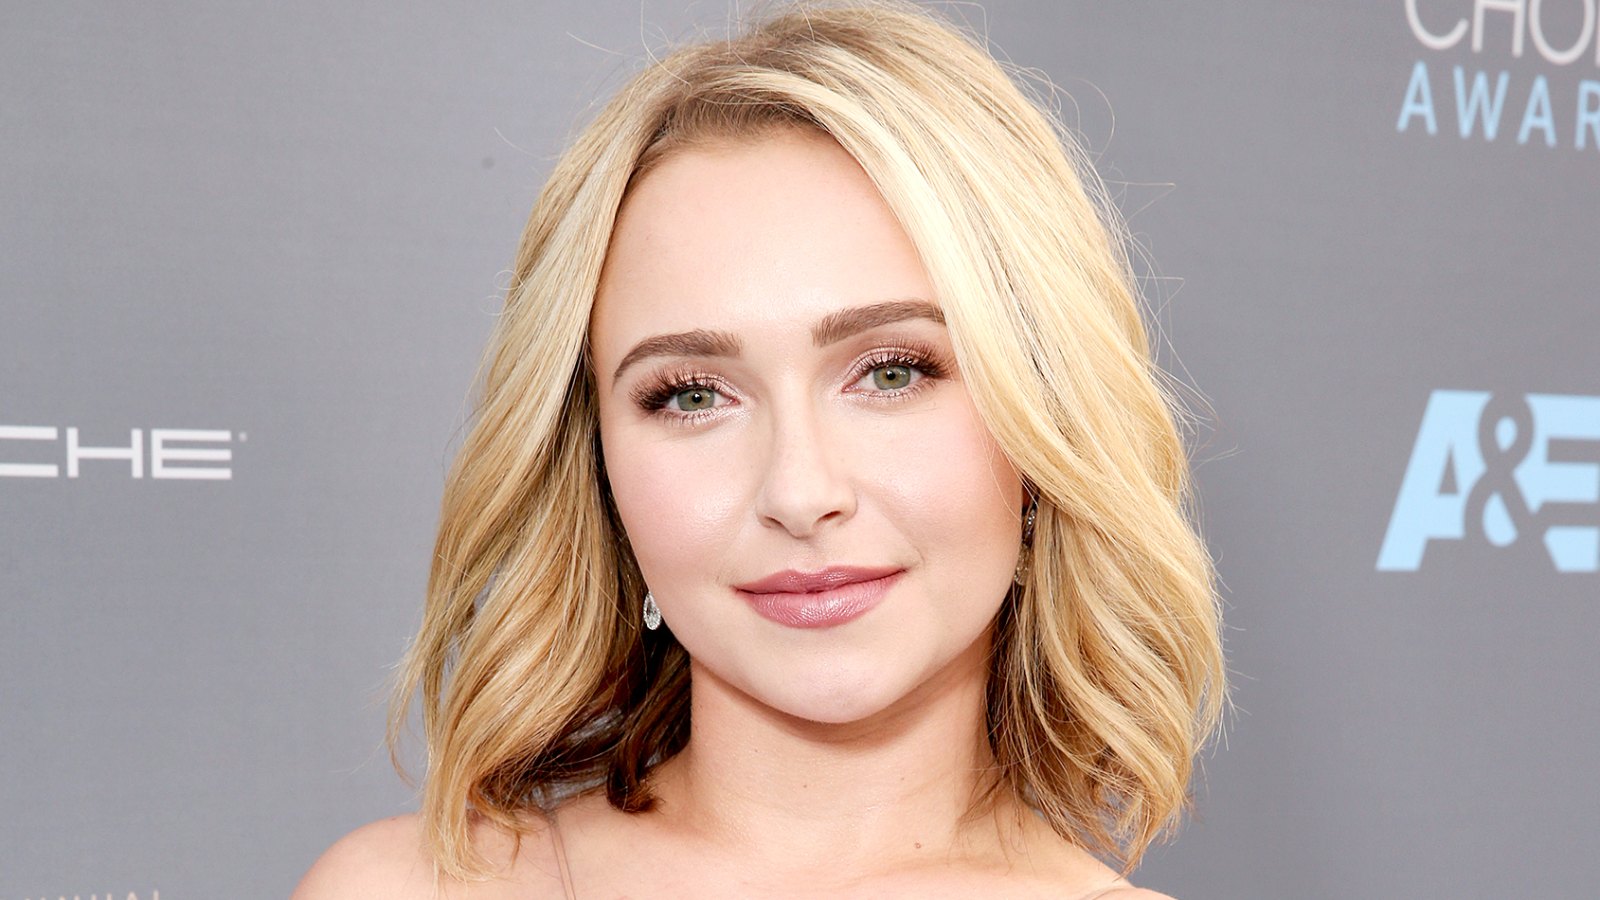 Hayden Panettiere attends the 21st Annual Critics' Choice Awards.